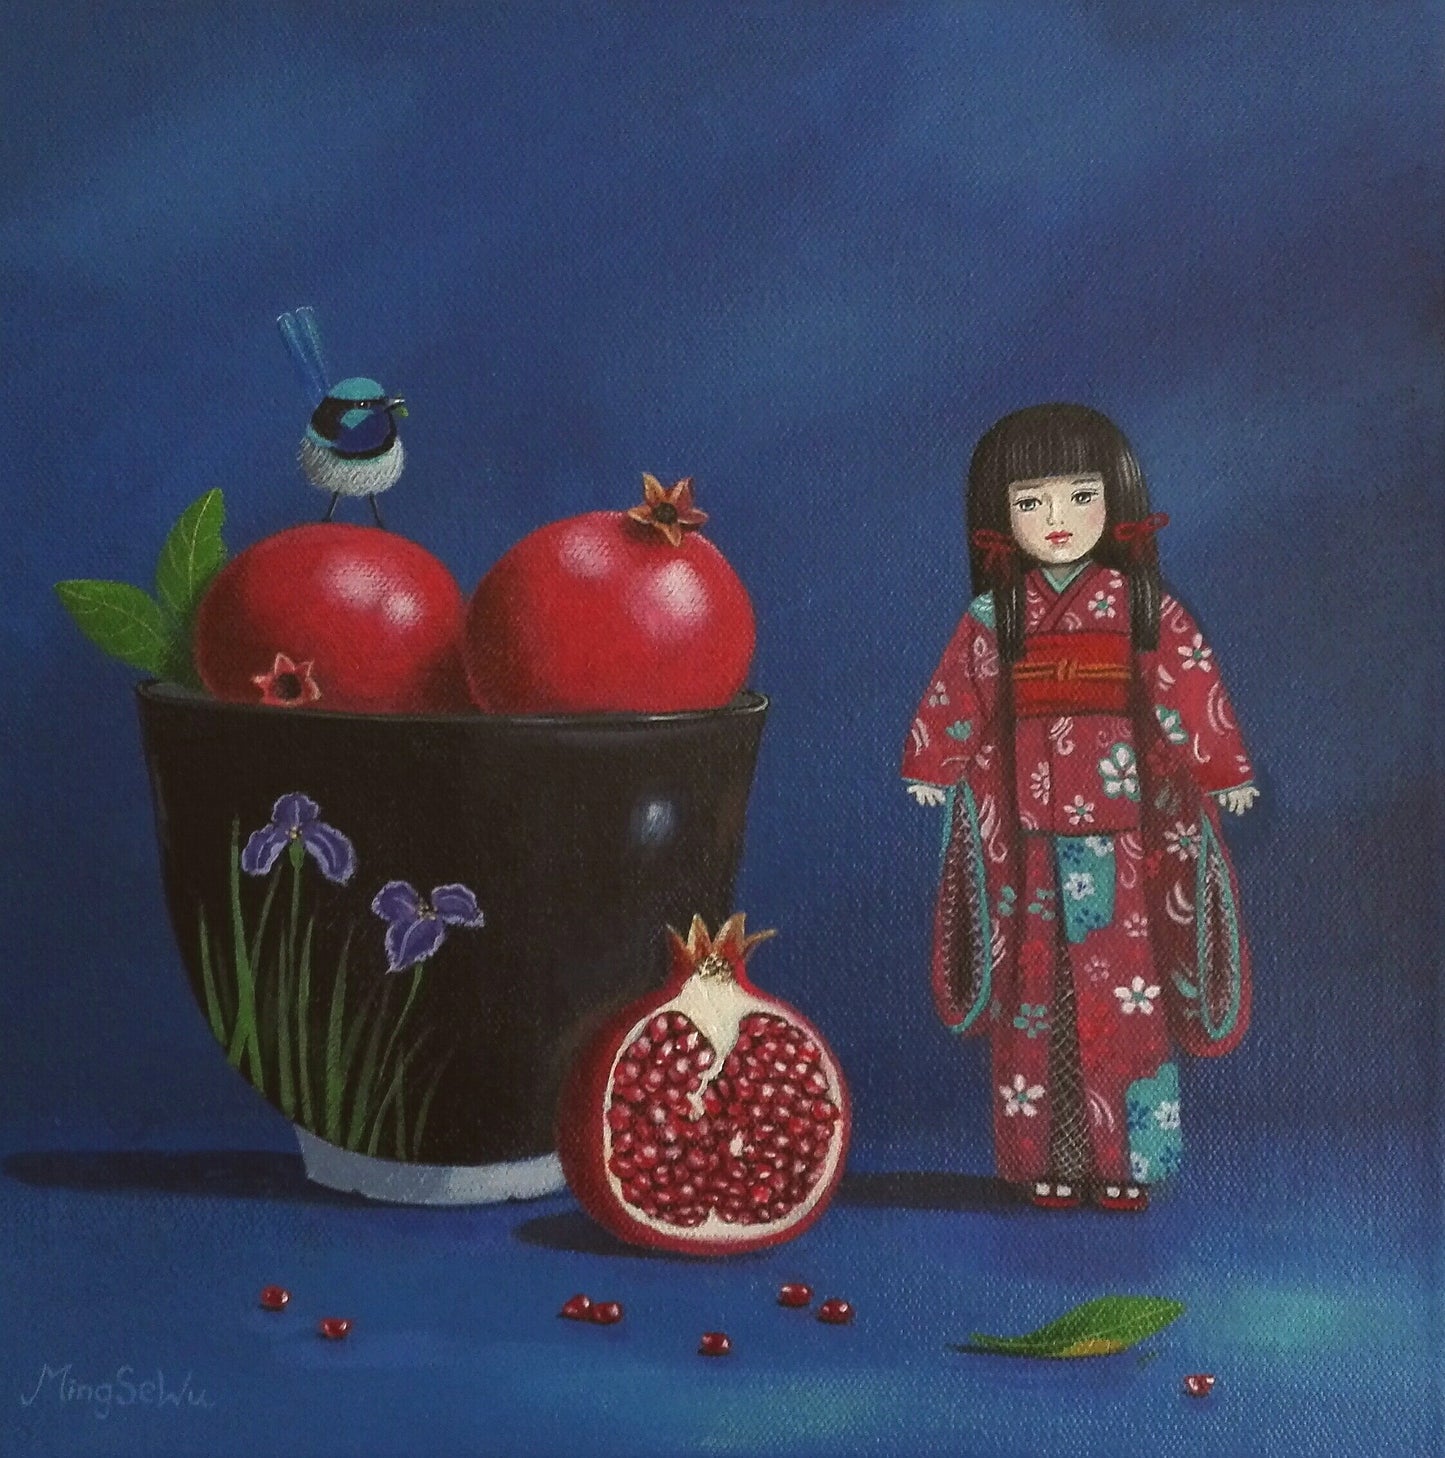 Pomegranate and Doll